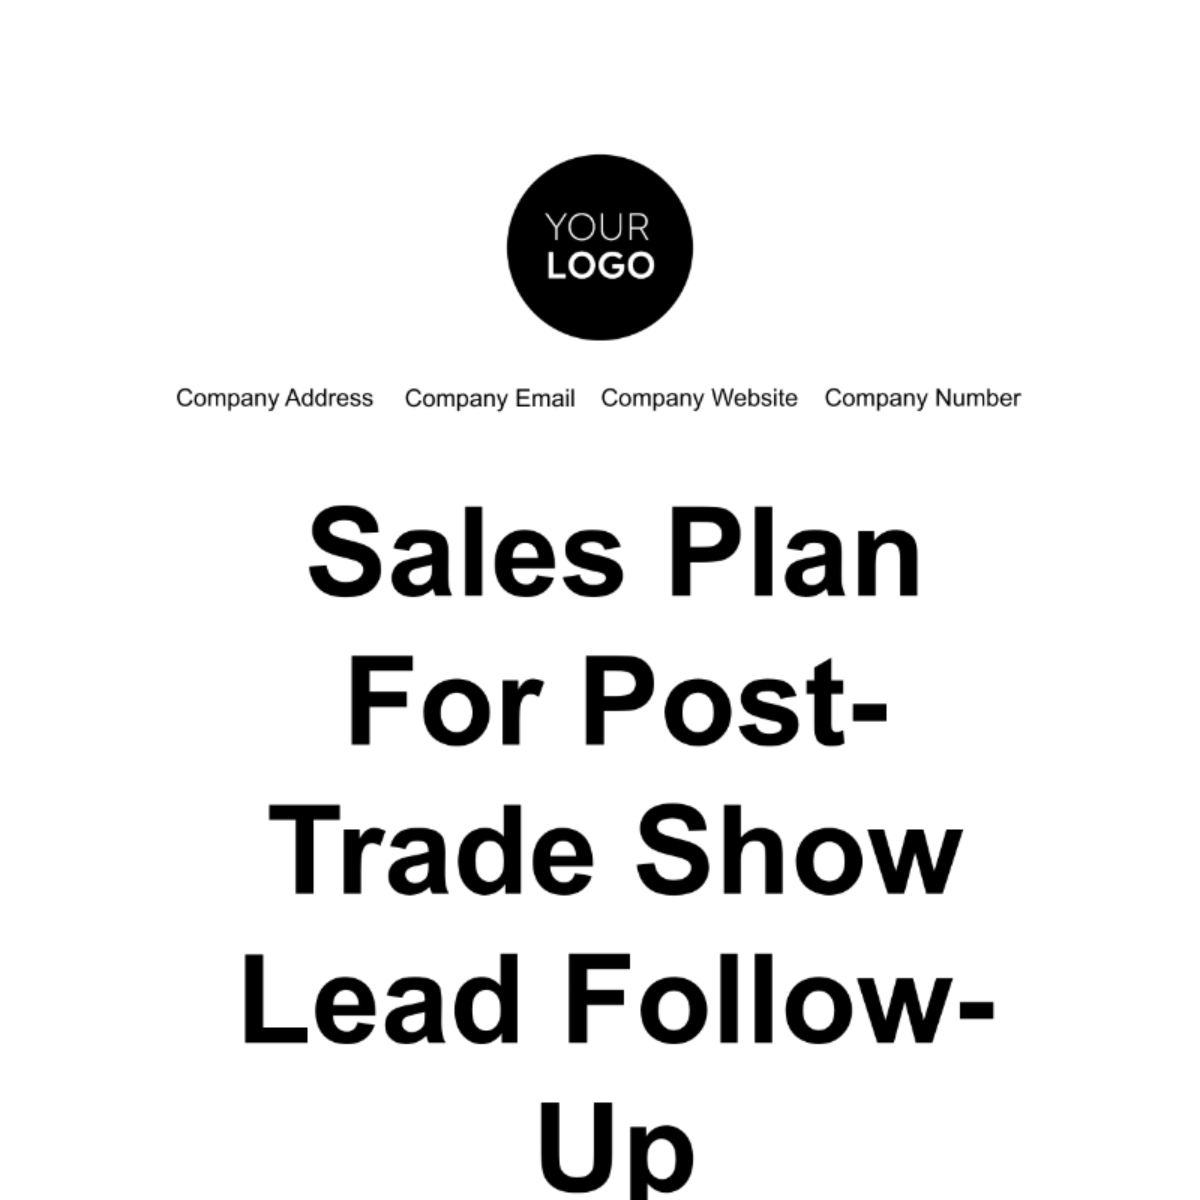 Free Sales Plan for Post-Trade Show Lead Follow-Up Template